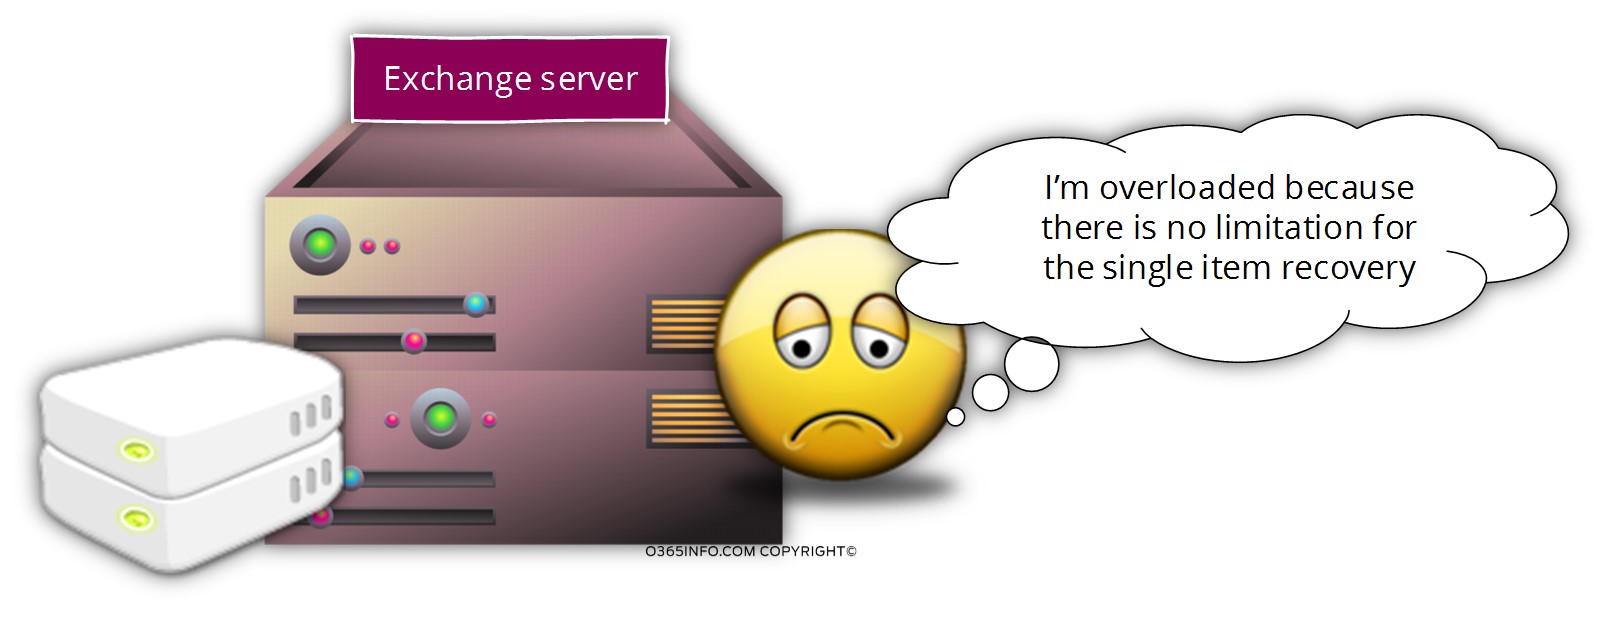 main disadvantage is the overload that will be created on the Exchange server side